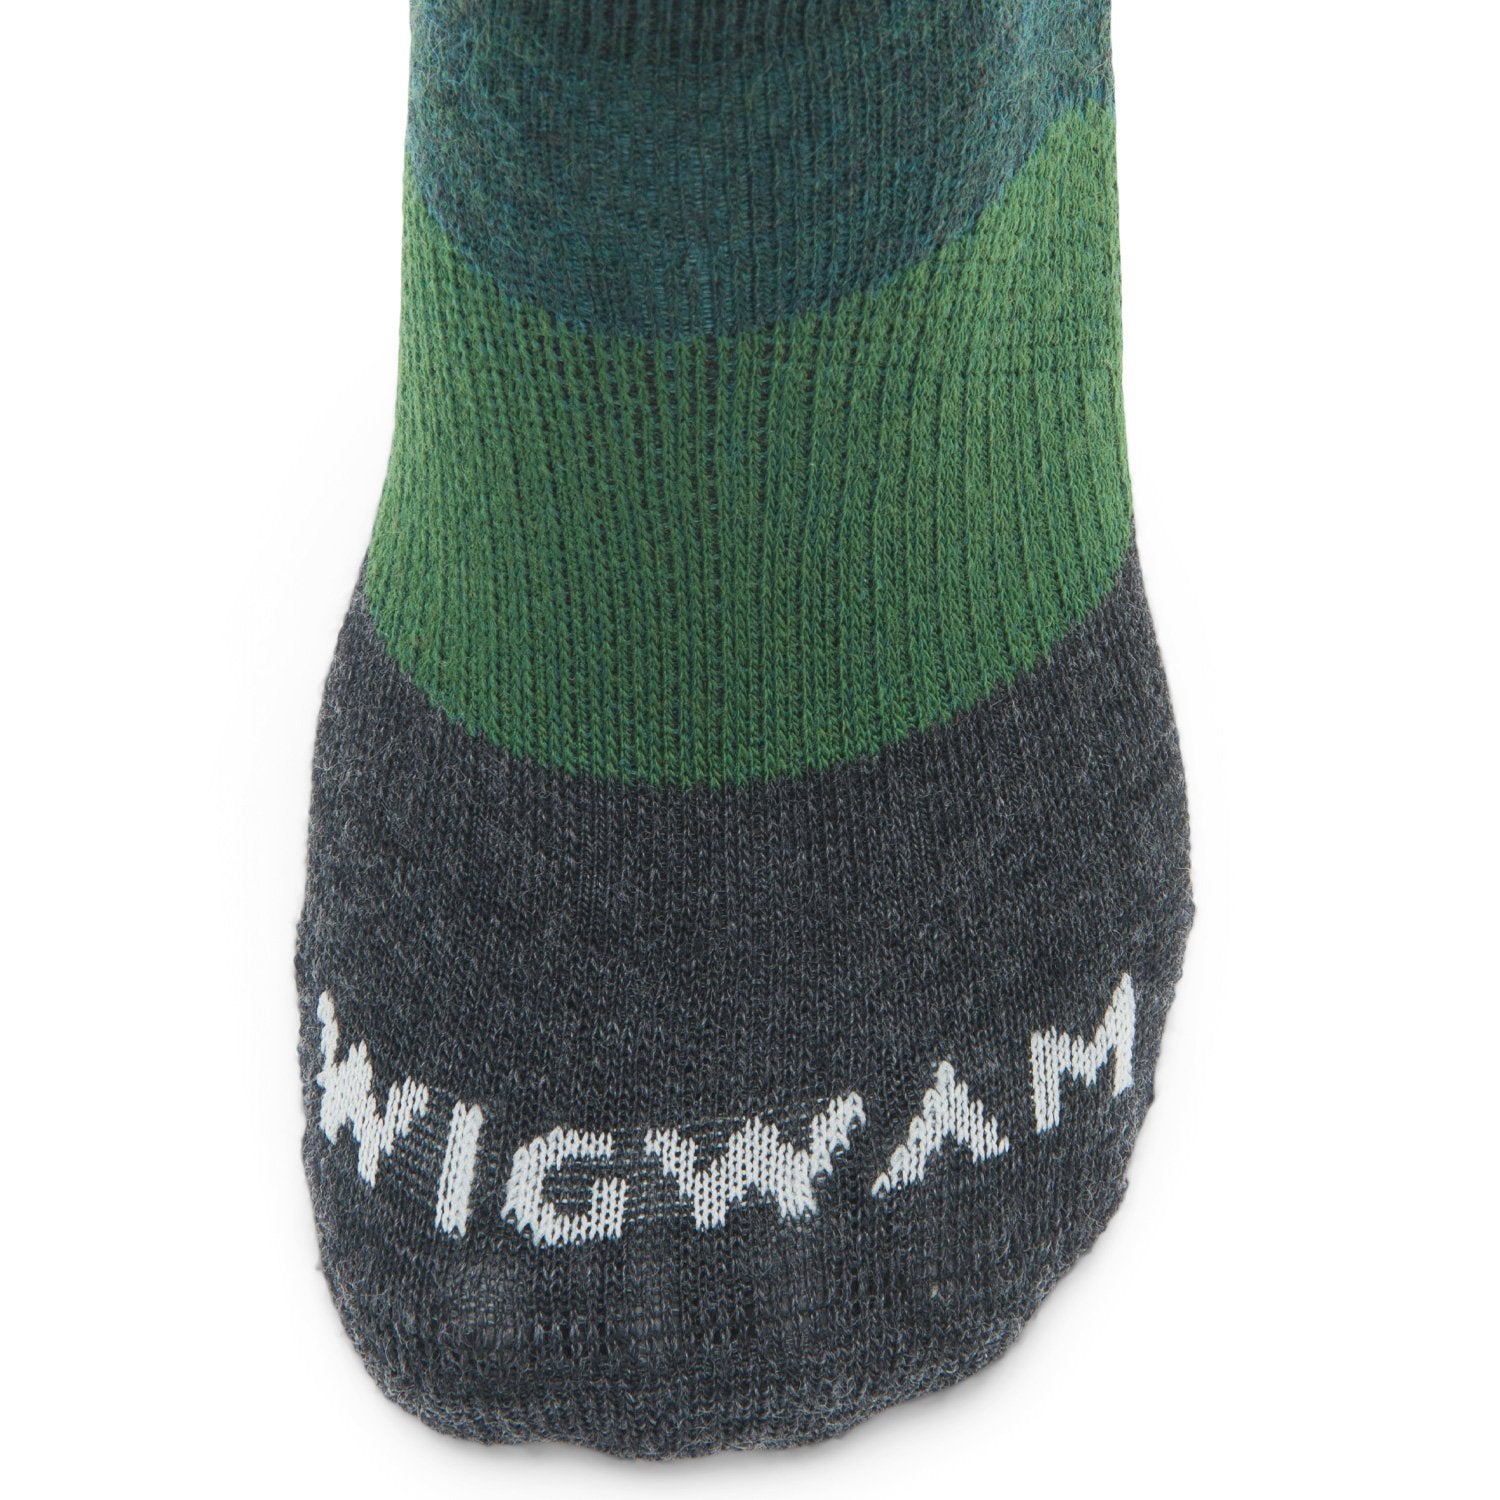 Trail Junkie Lightweight Low Sock With Merino Wool - June Bug toe perspective - made in The USA Wigwam Socks